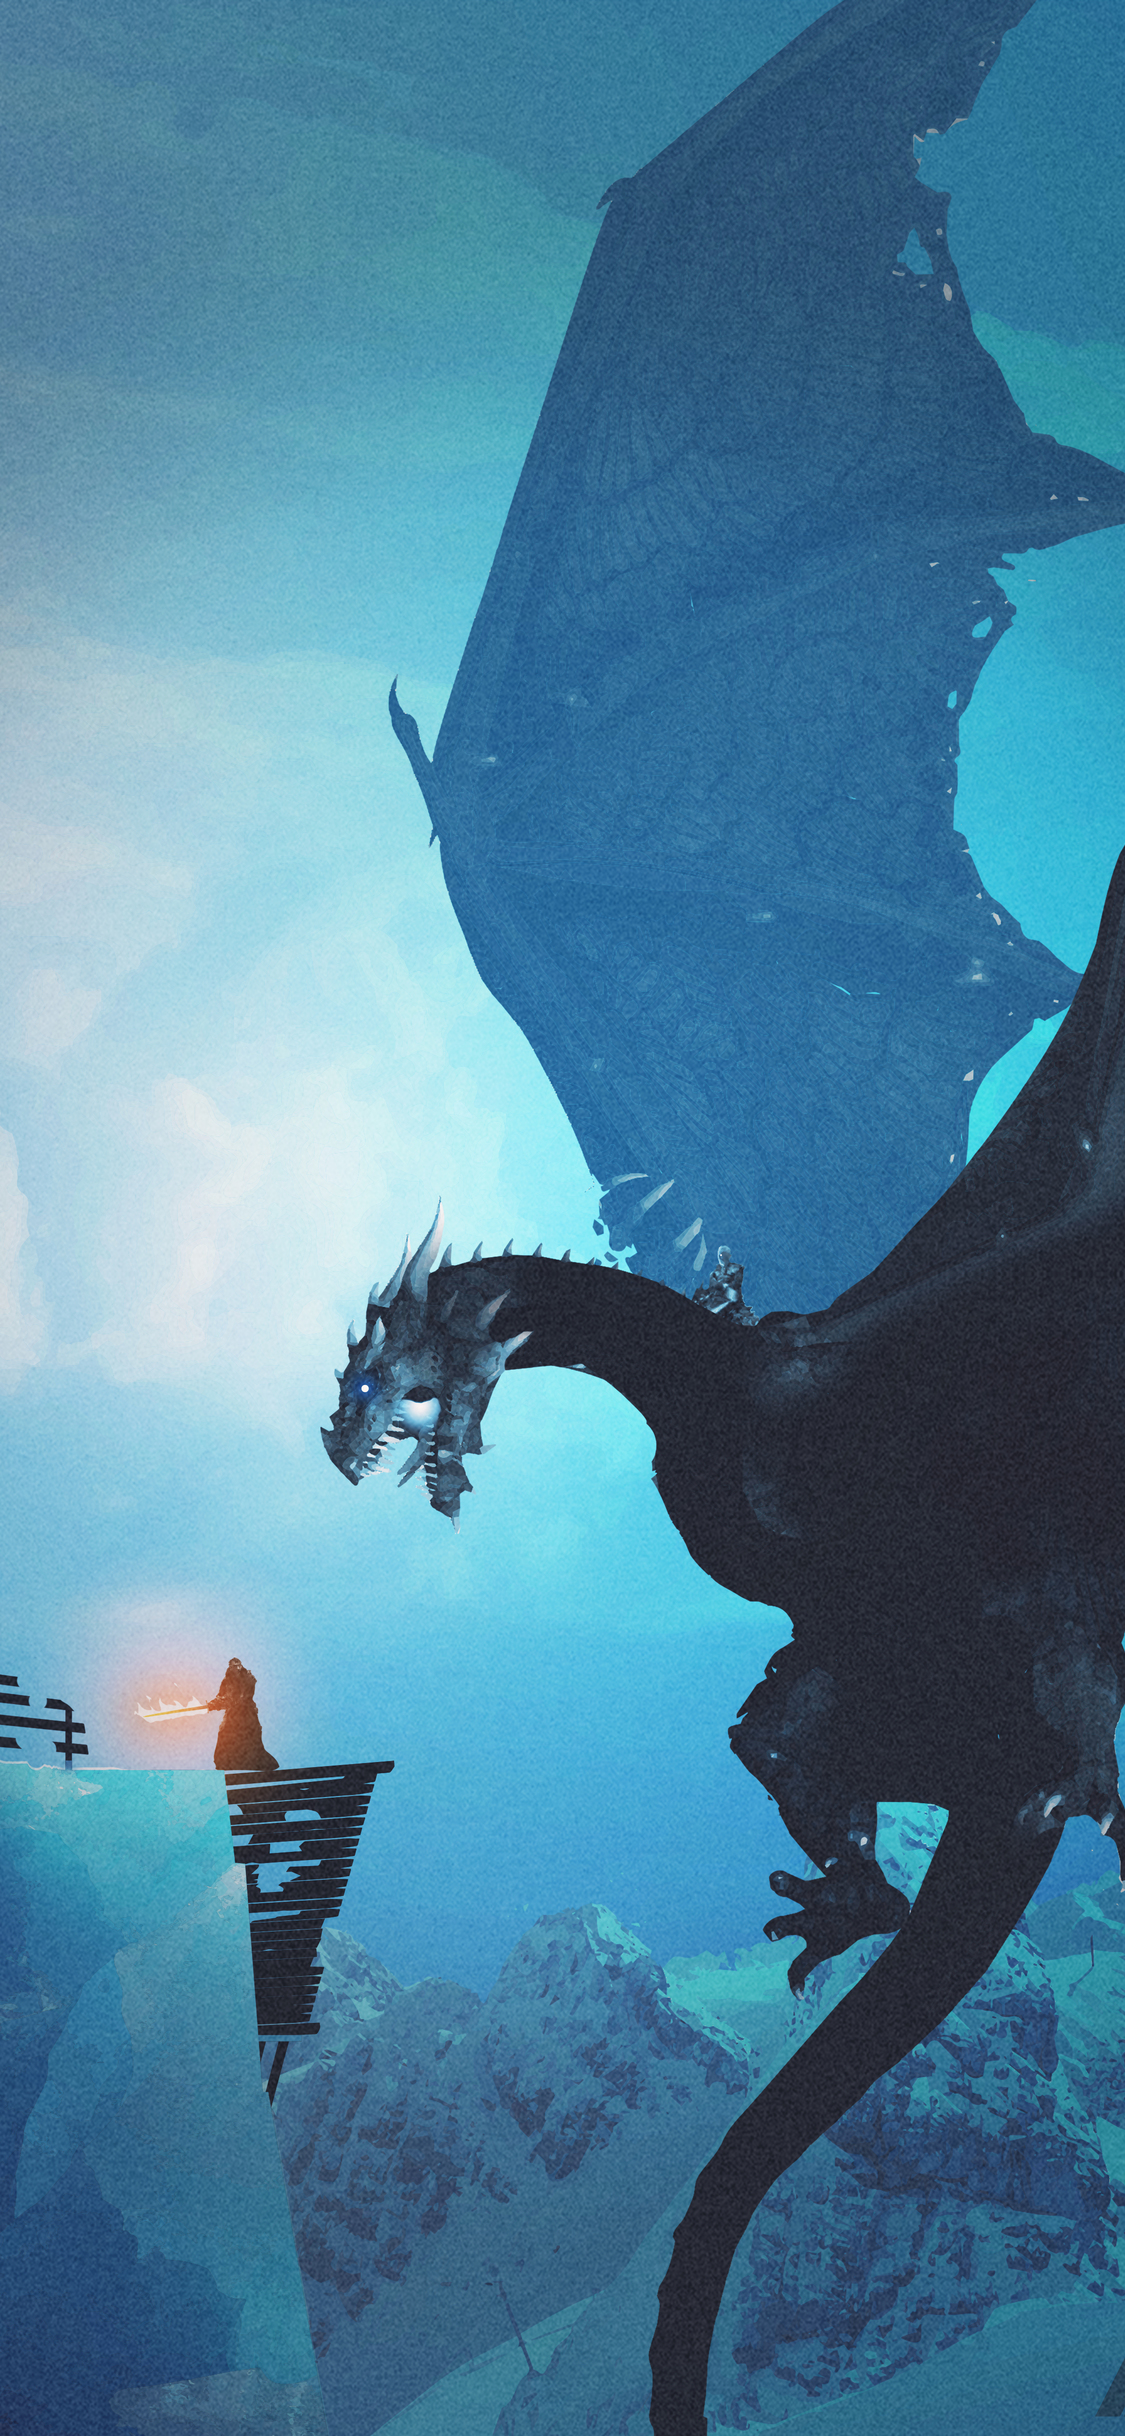 night-king-dragon-vs-lord-of-light iPhone game of thrones wallpaper